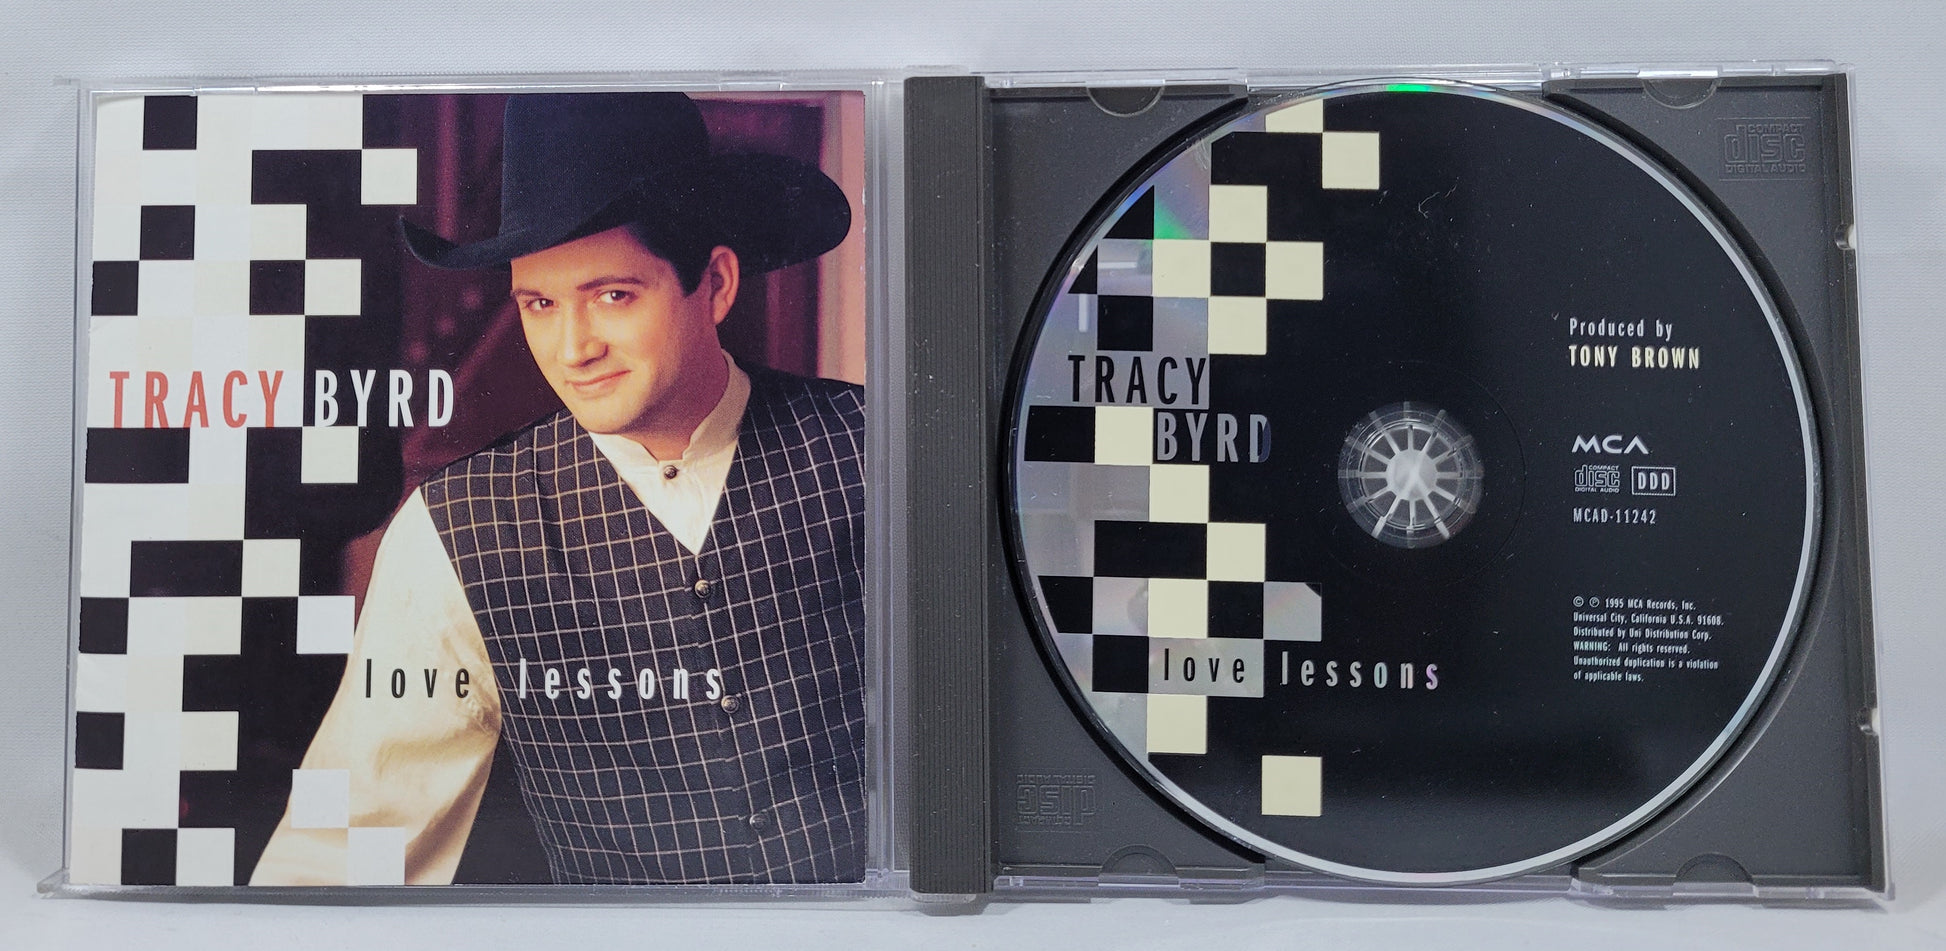 Tracy Byrd - Love Lessons [1995 Used CD]